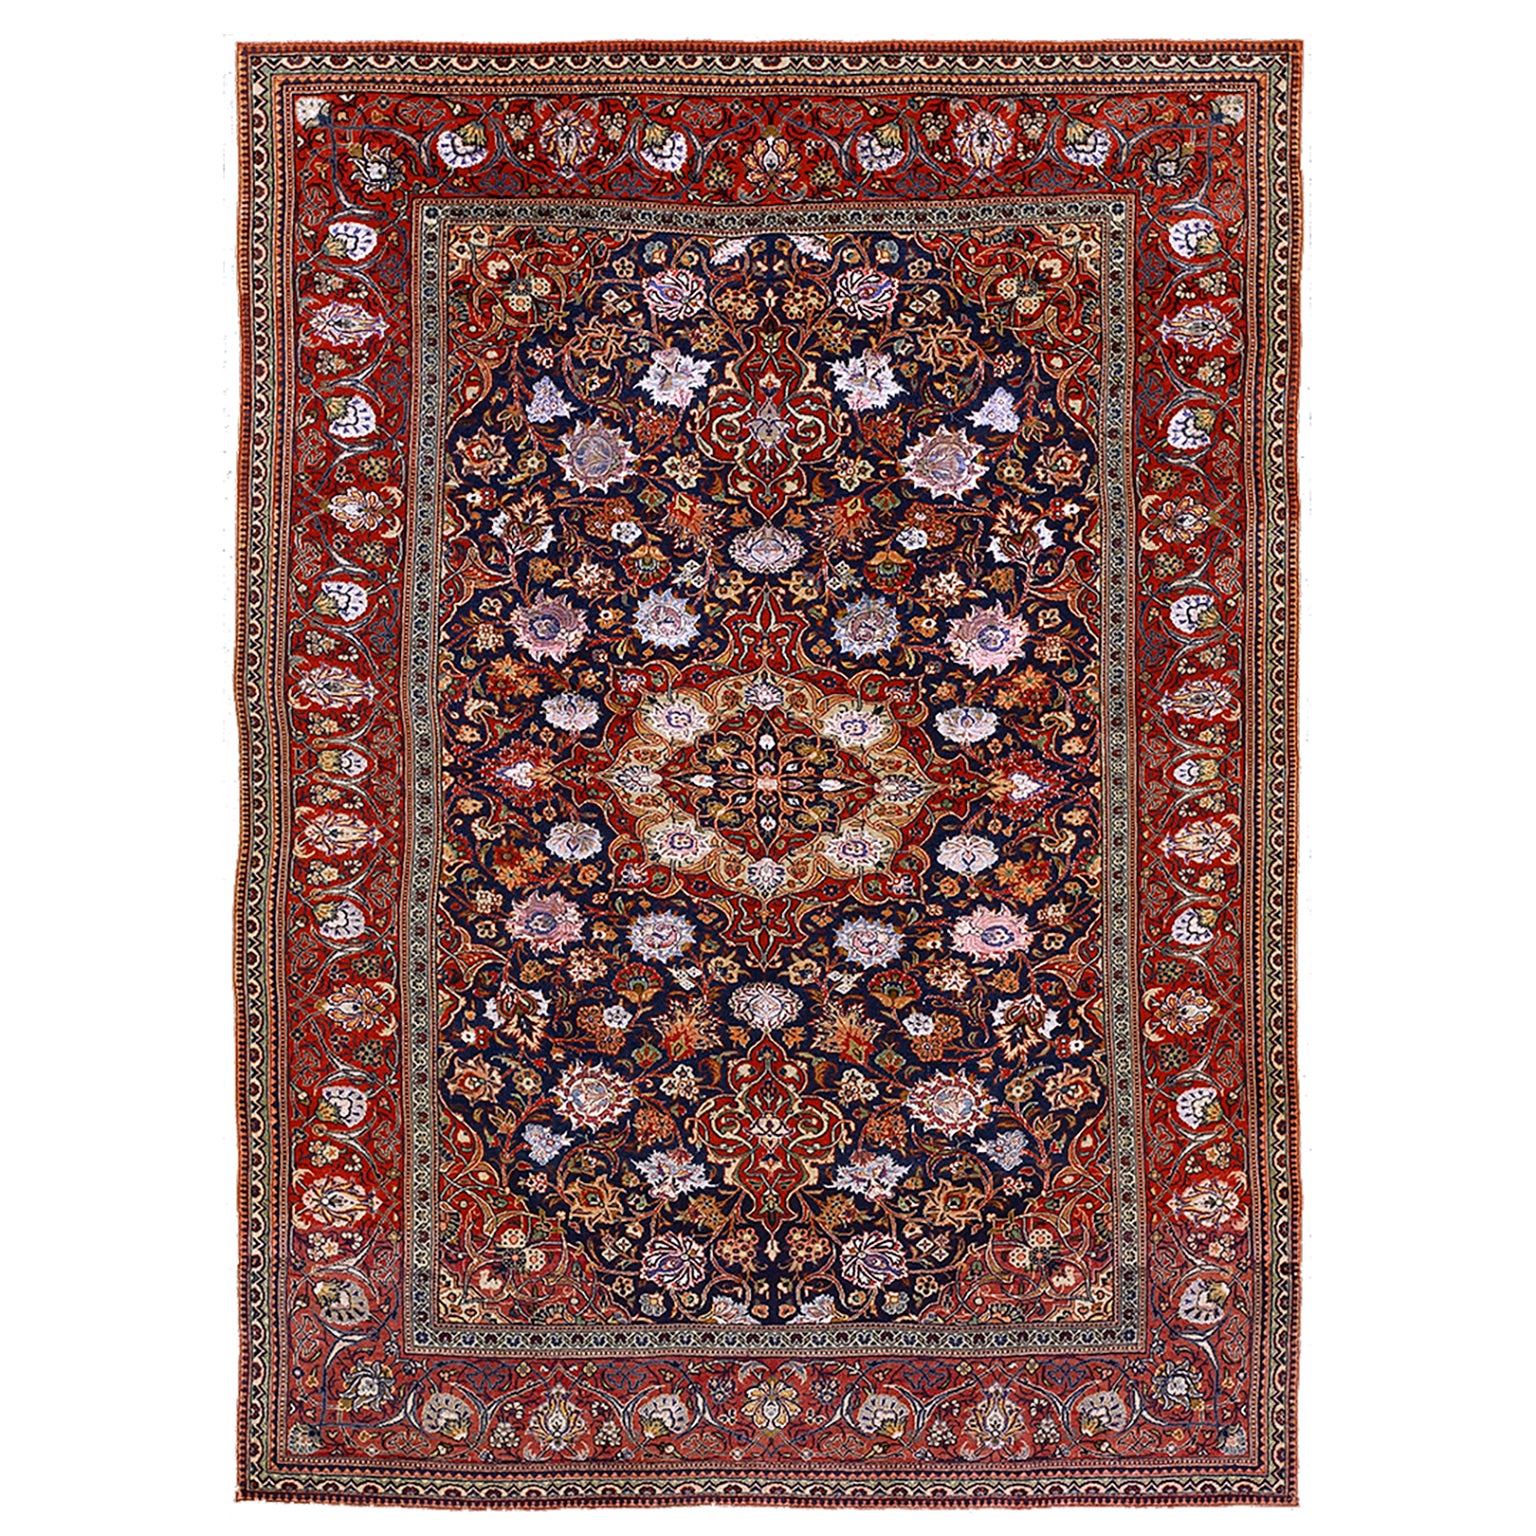 Early 20th Century Persian Silk & Wool Kashan Carpet ( 4'4" x 6'6' - 132 x 198 ) For Sale